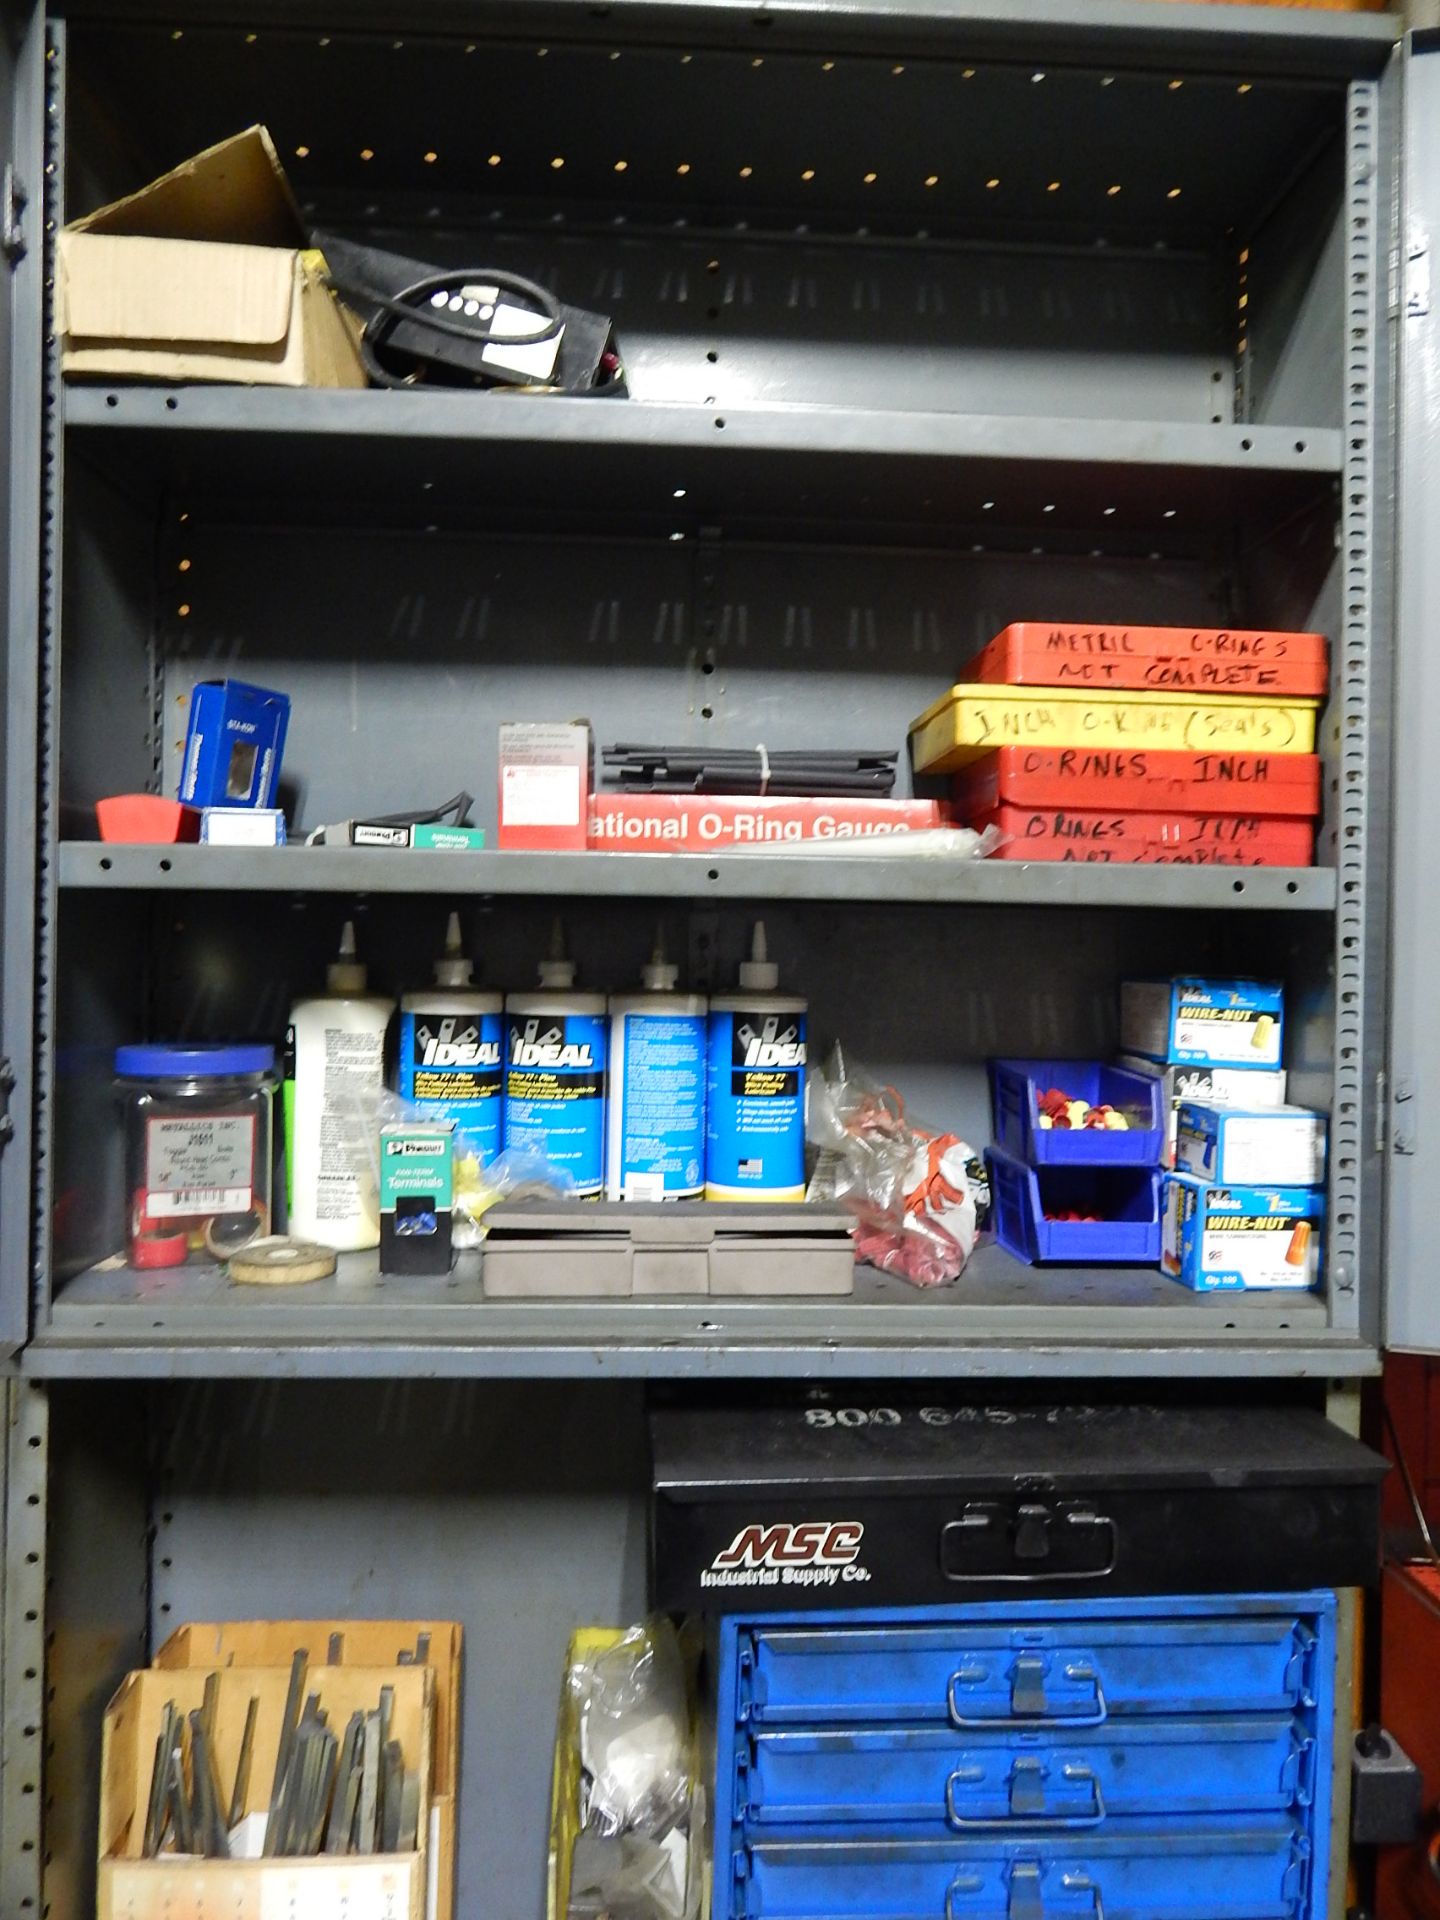 Metal Storage Cabinets and Contents - Image 2 of 2